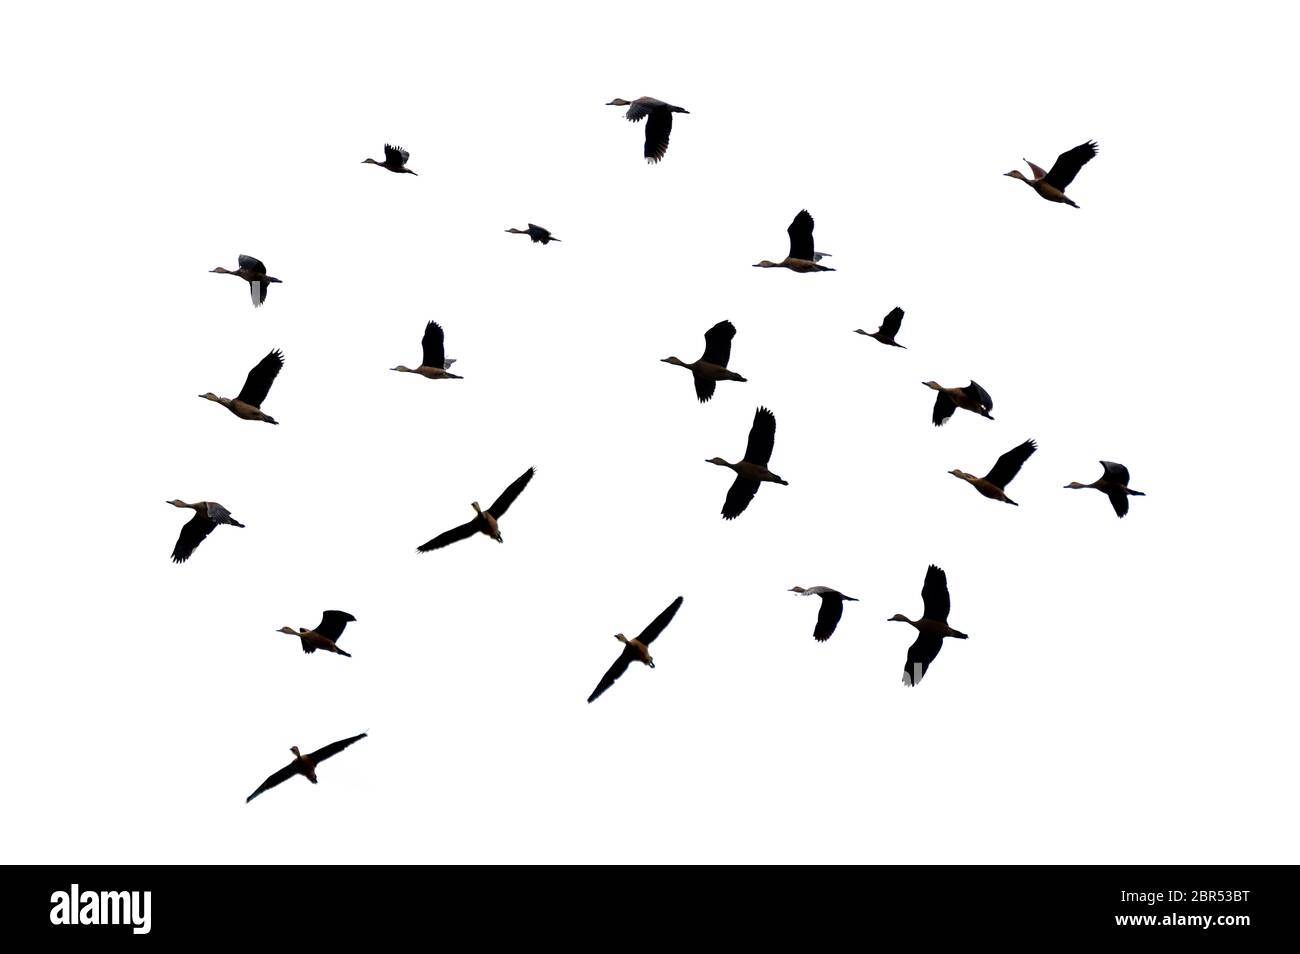 A group of birds flying on a white background Isolate Stock Photo